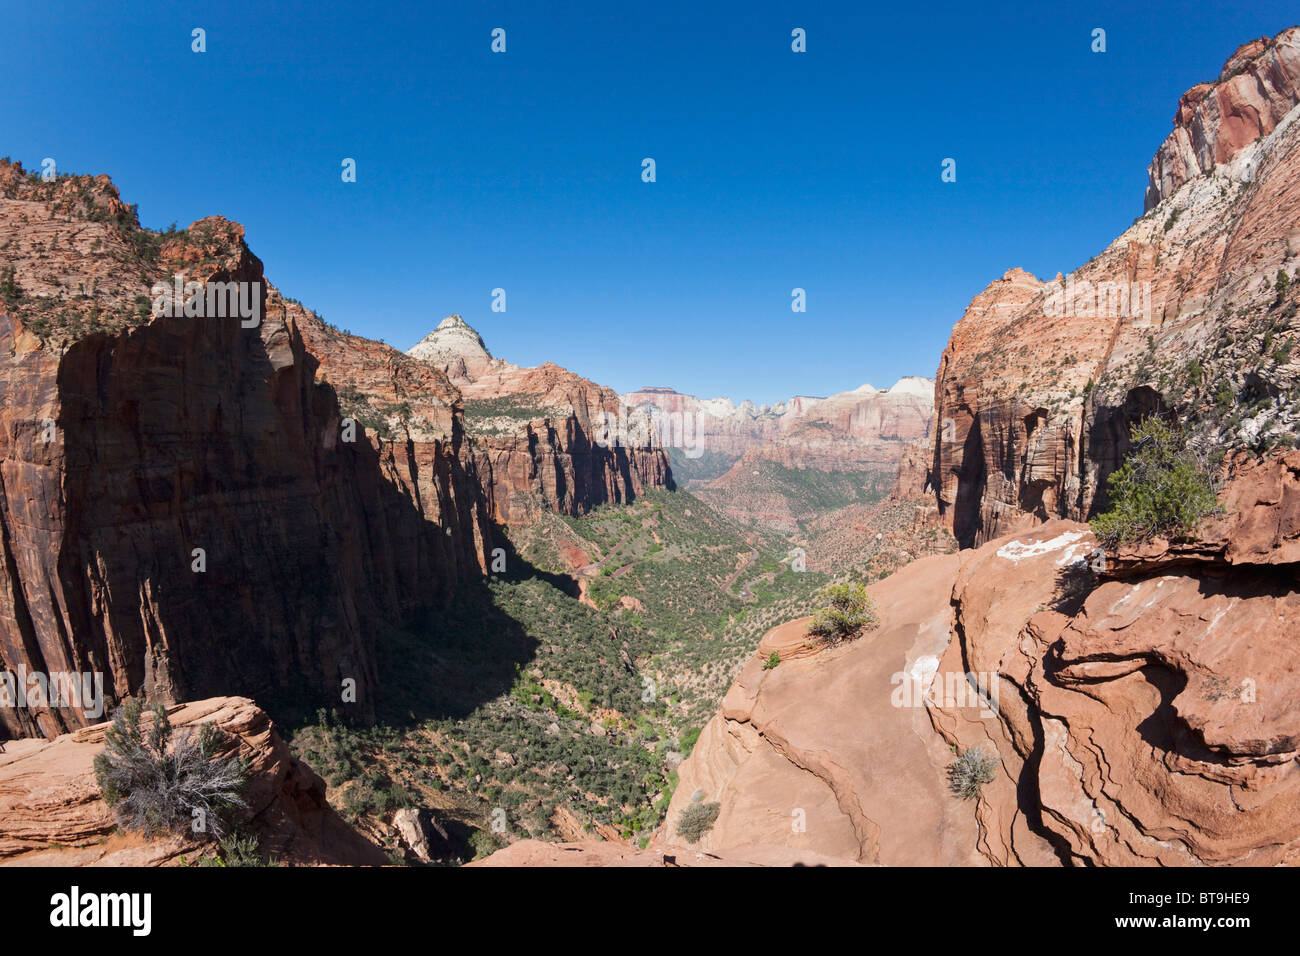 Lookout point, Canyon Overlook, Zion National Park, Utah, USA Banque D'Images